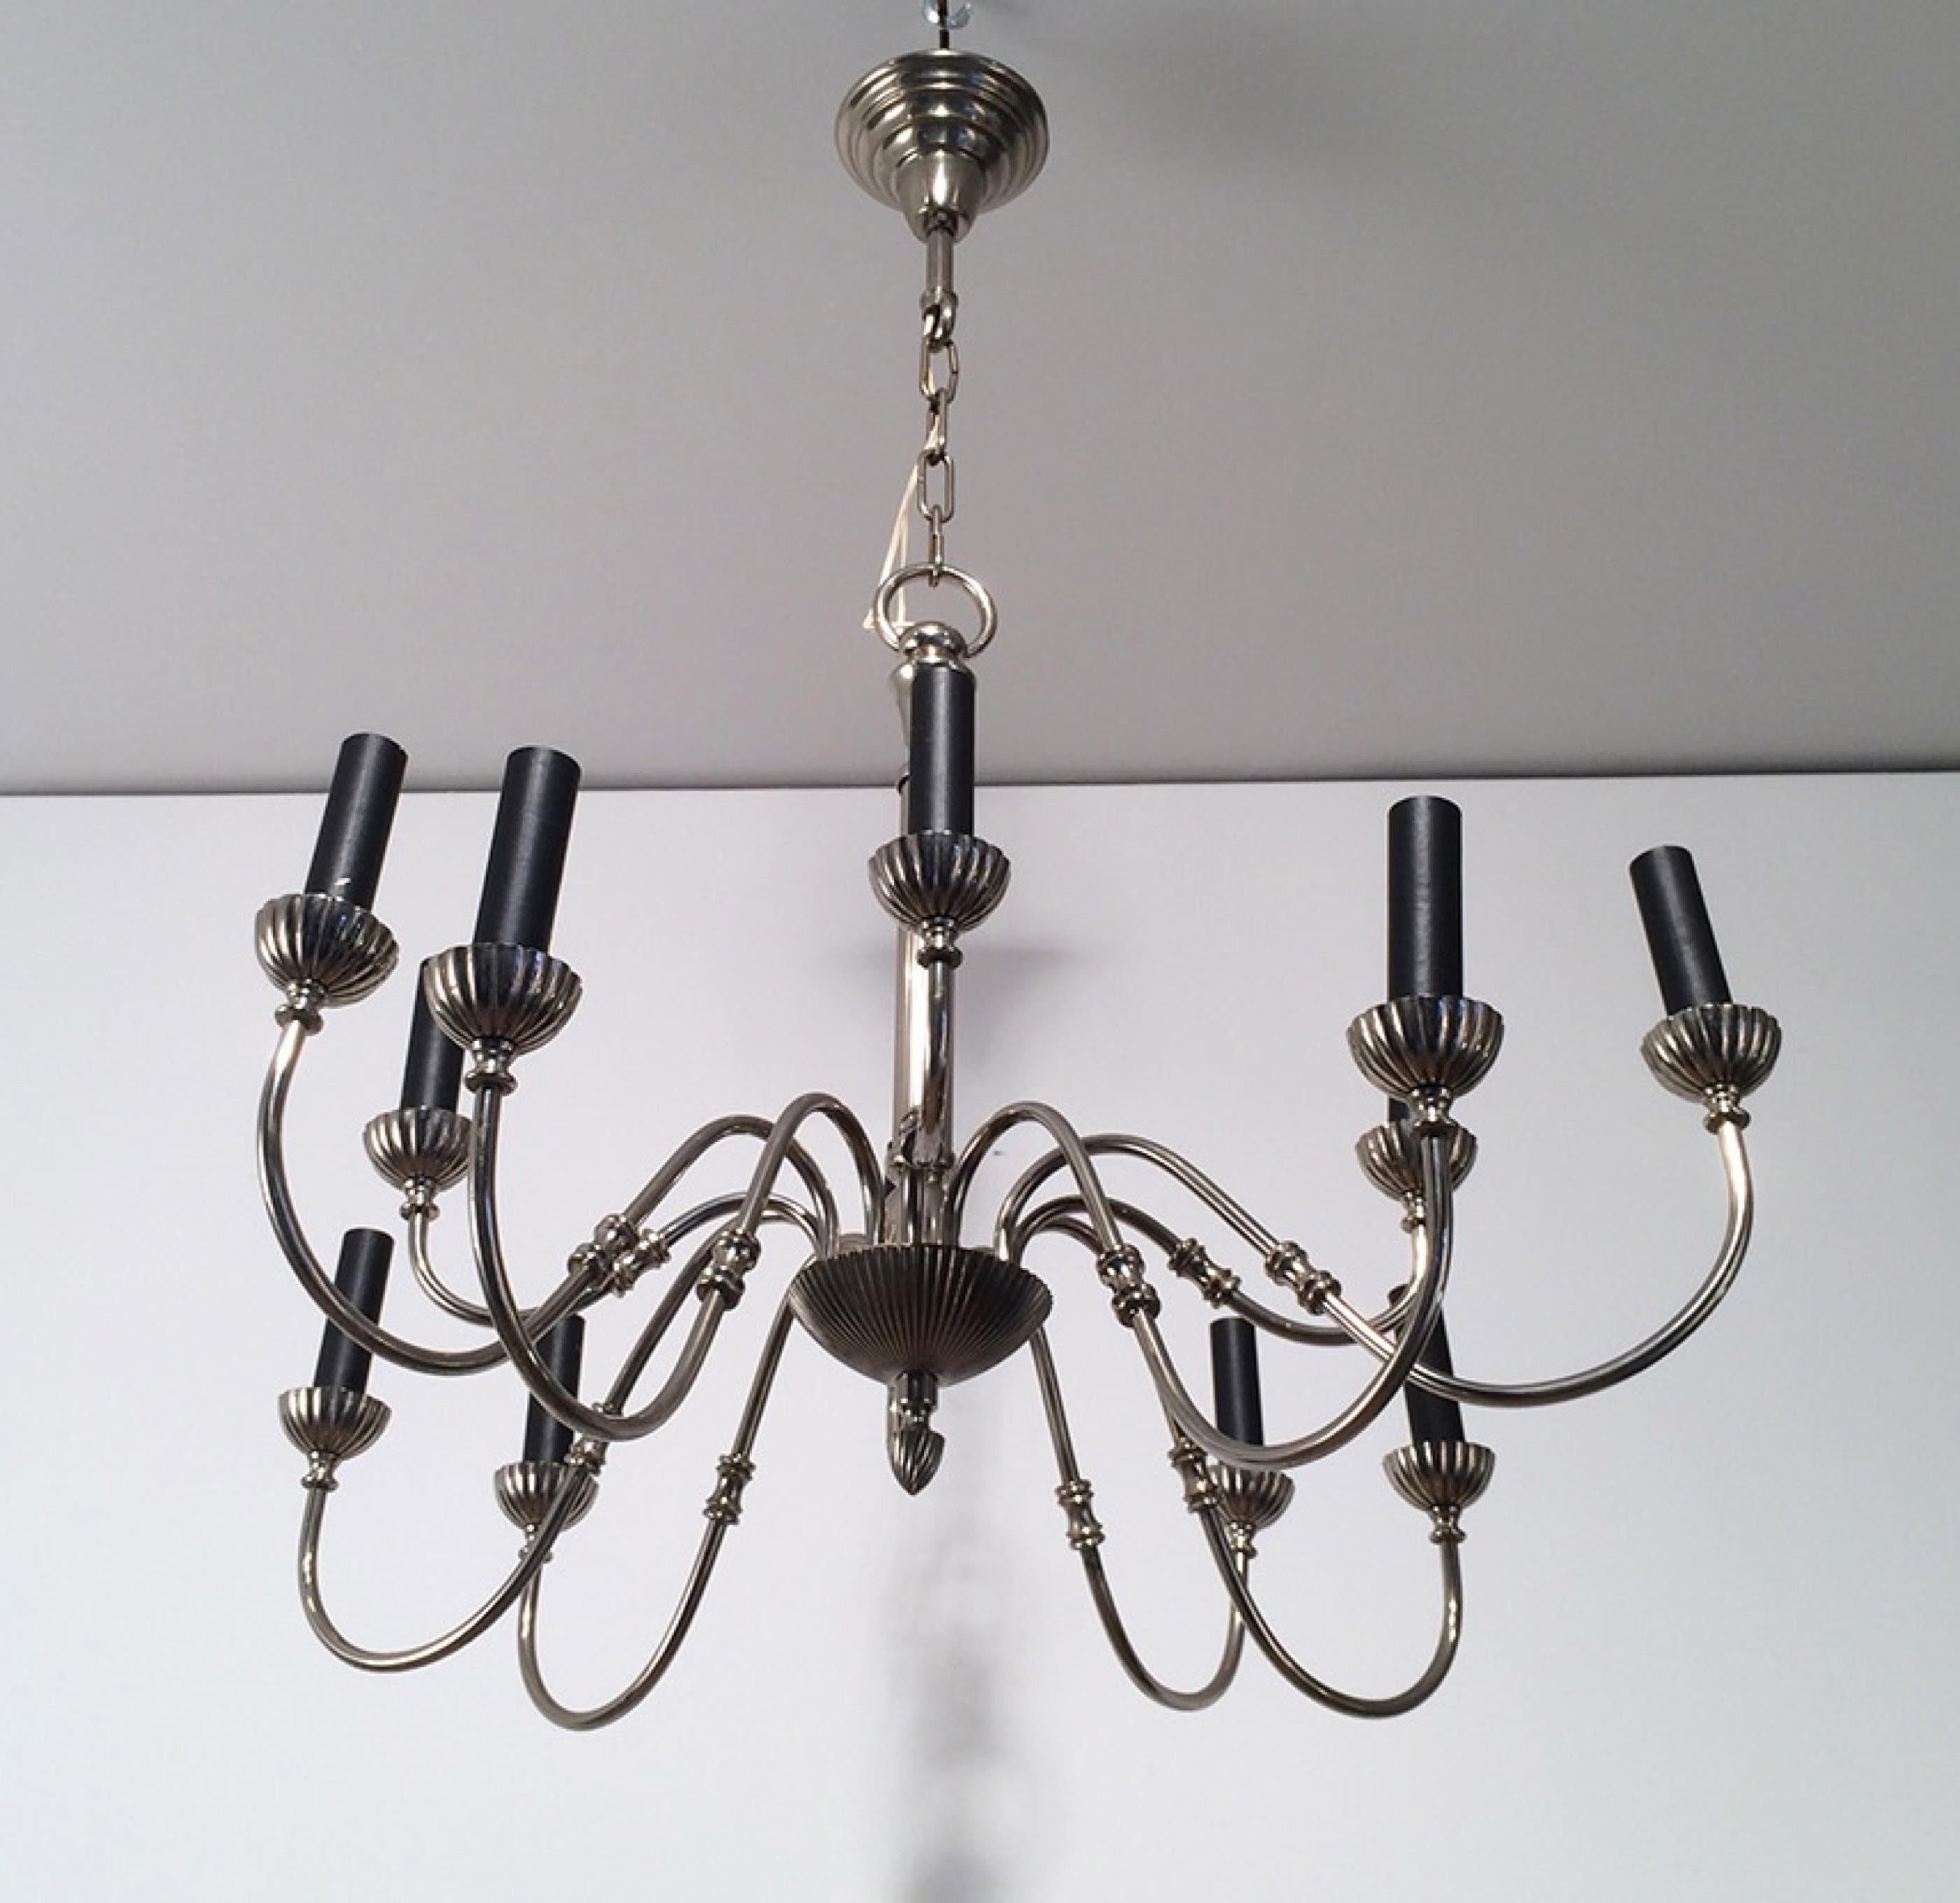 This very nice neoclassical chandelier is made of silver plated. This is a very elegant fixture with 12 arms. This is a French work. Circa 1940.